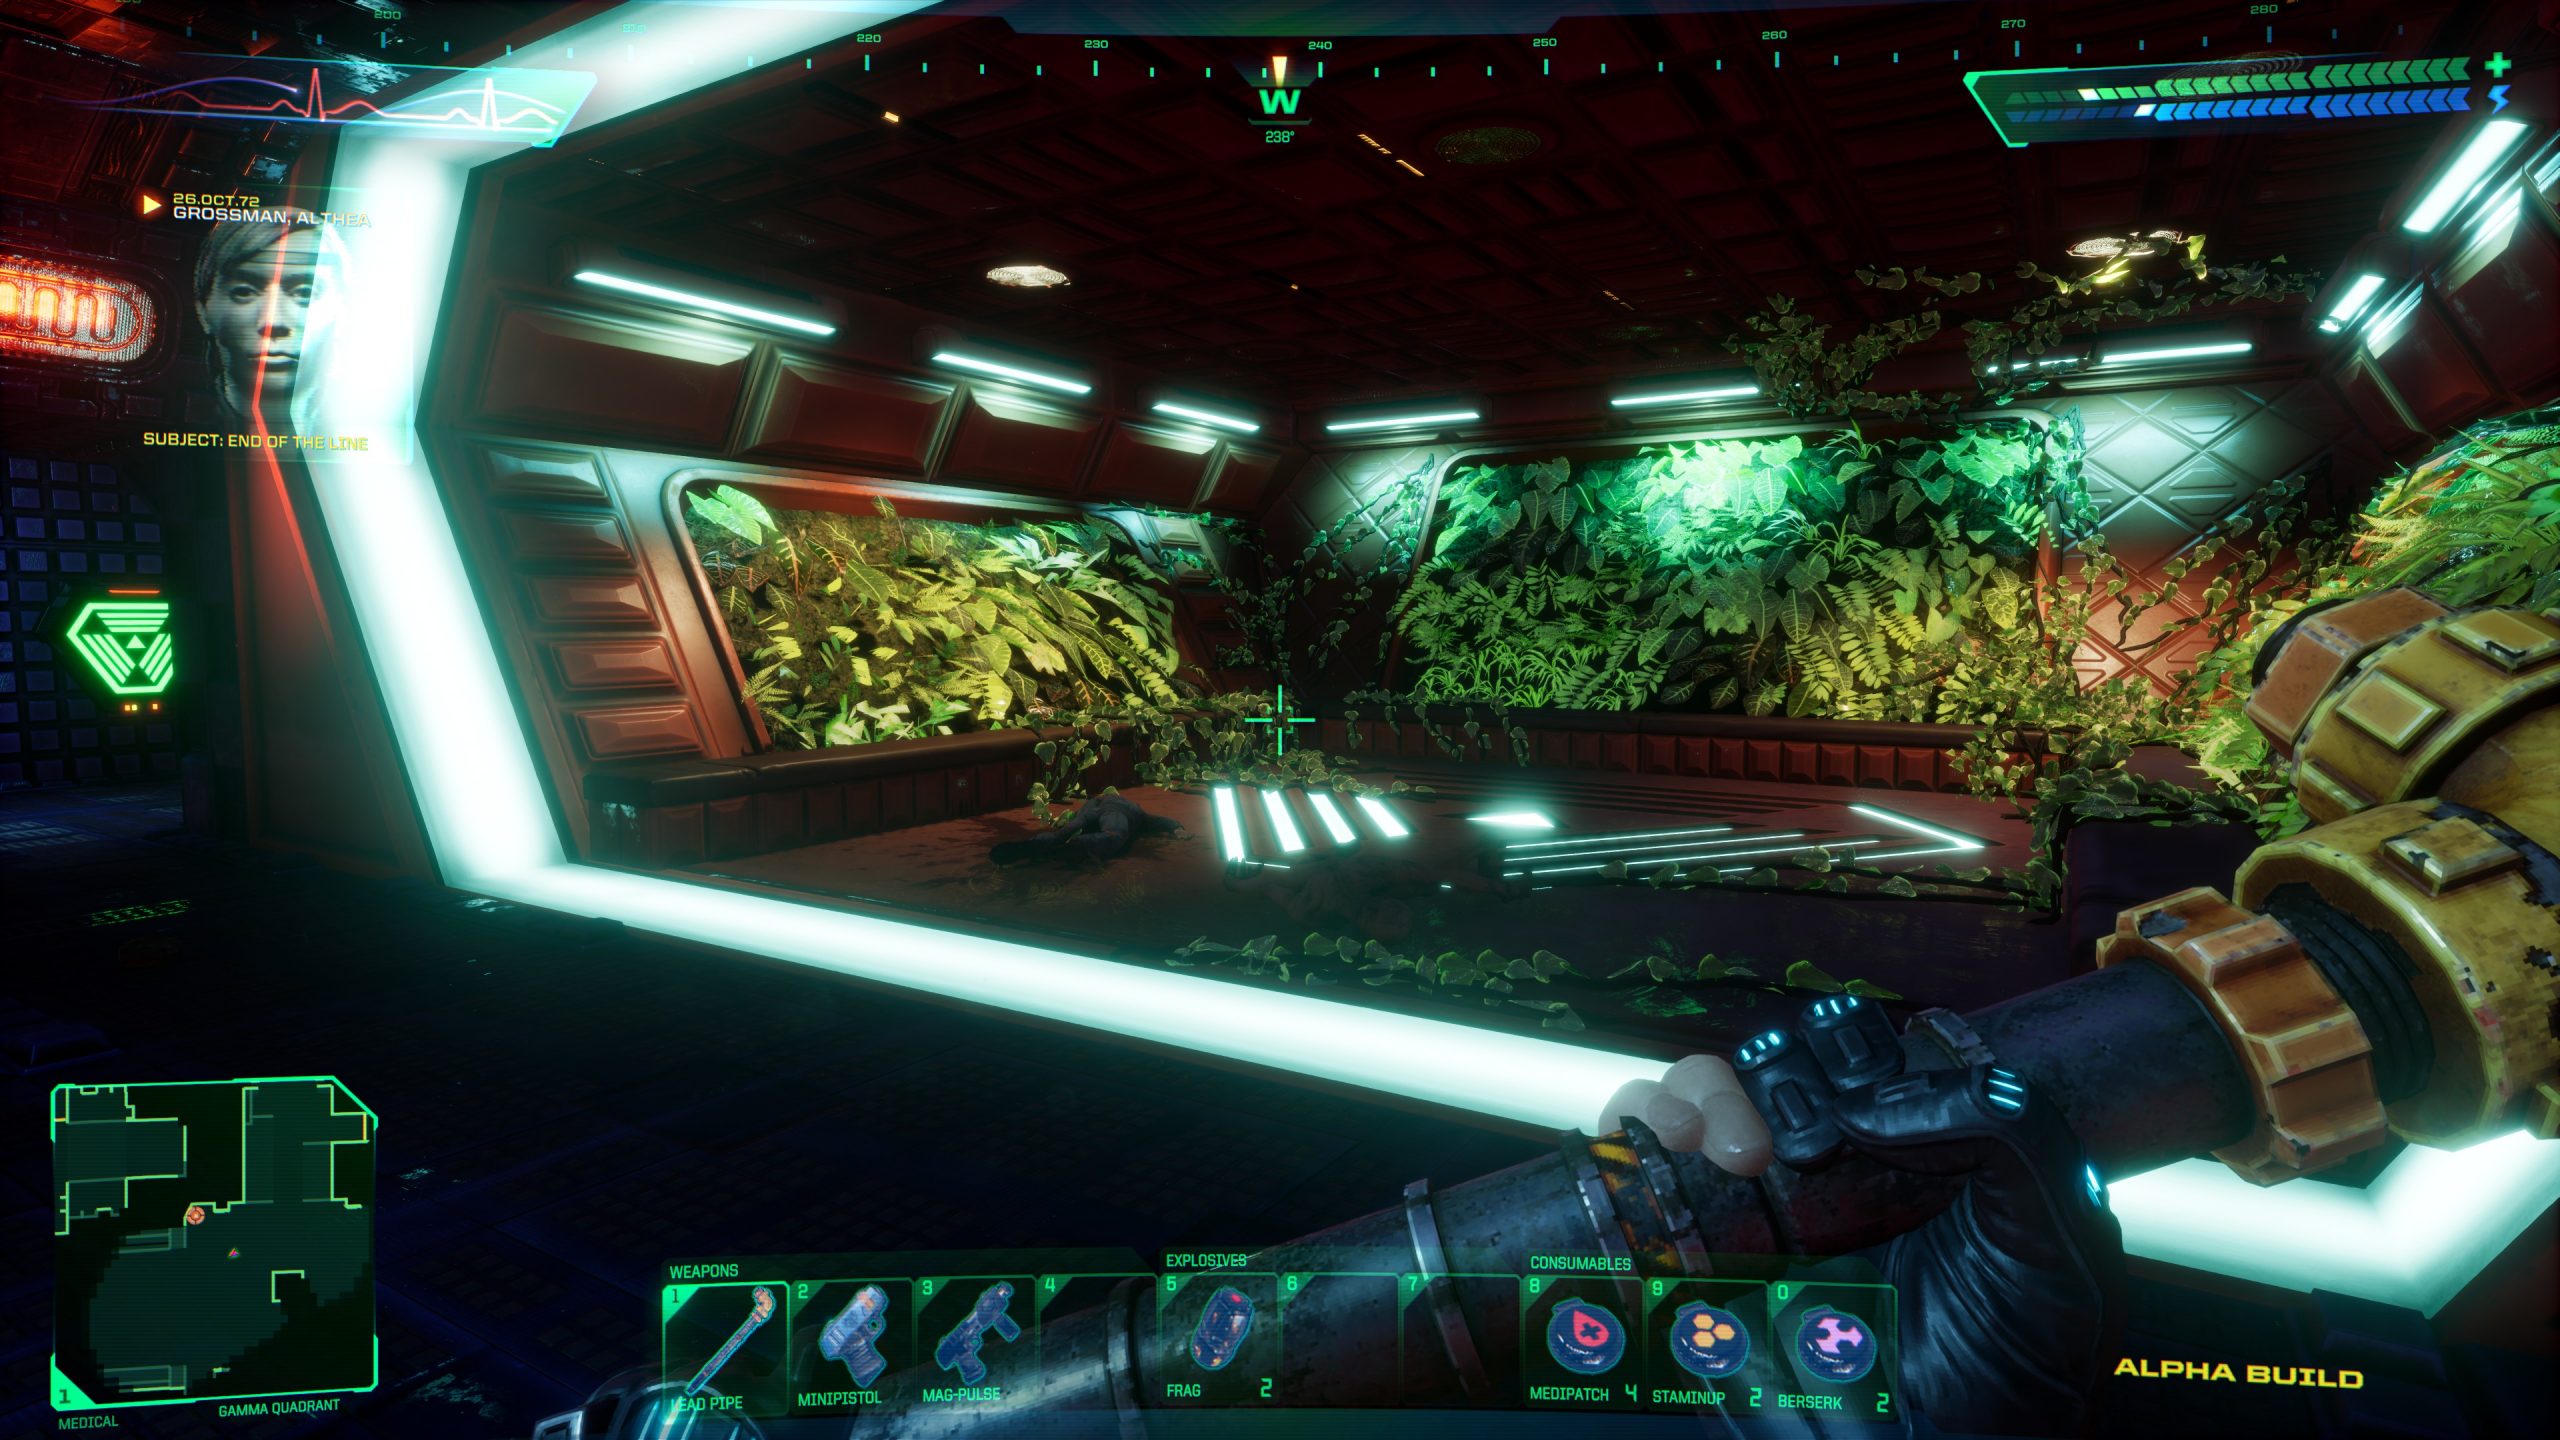 System Shock remake coming to PC this summer